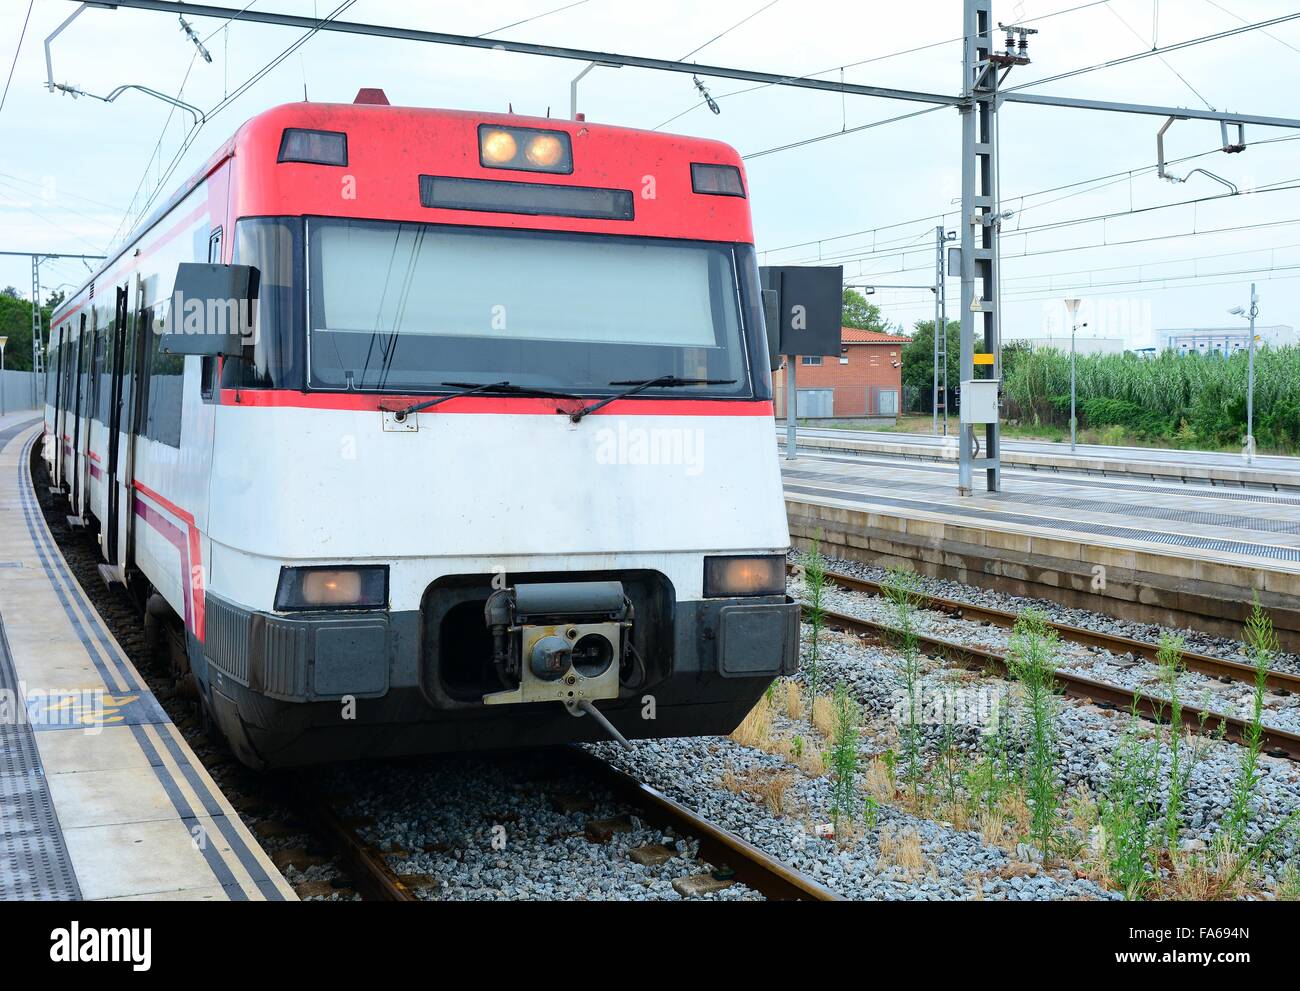 Passenger electric train stopped at platform in Blanes, Spain. Stock Photo